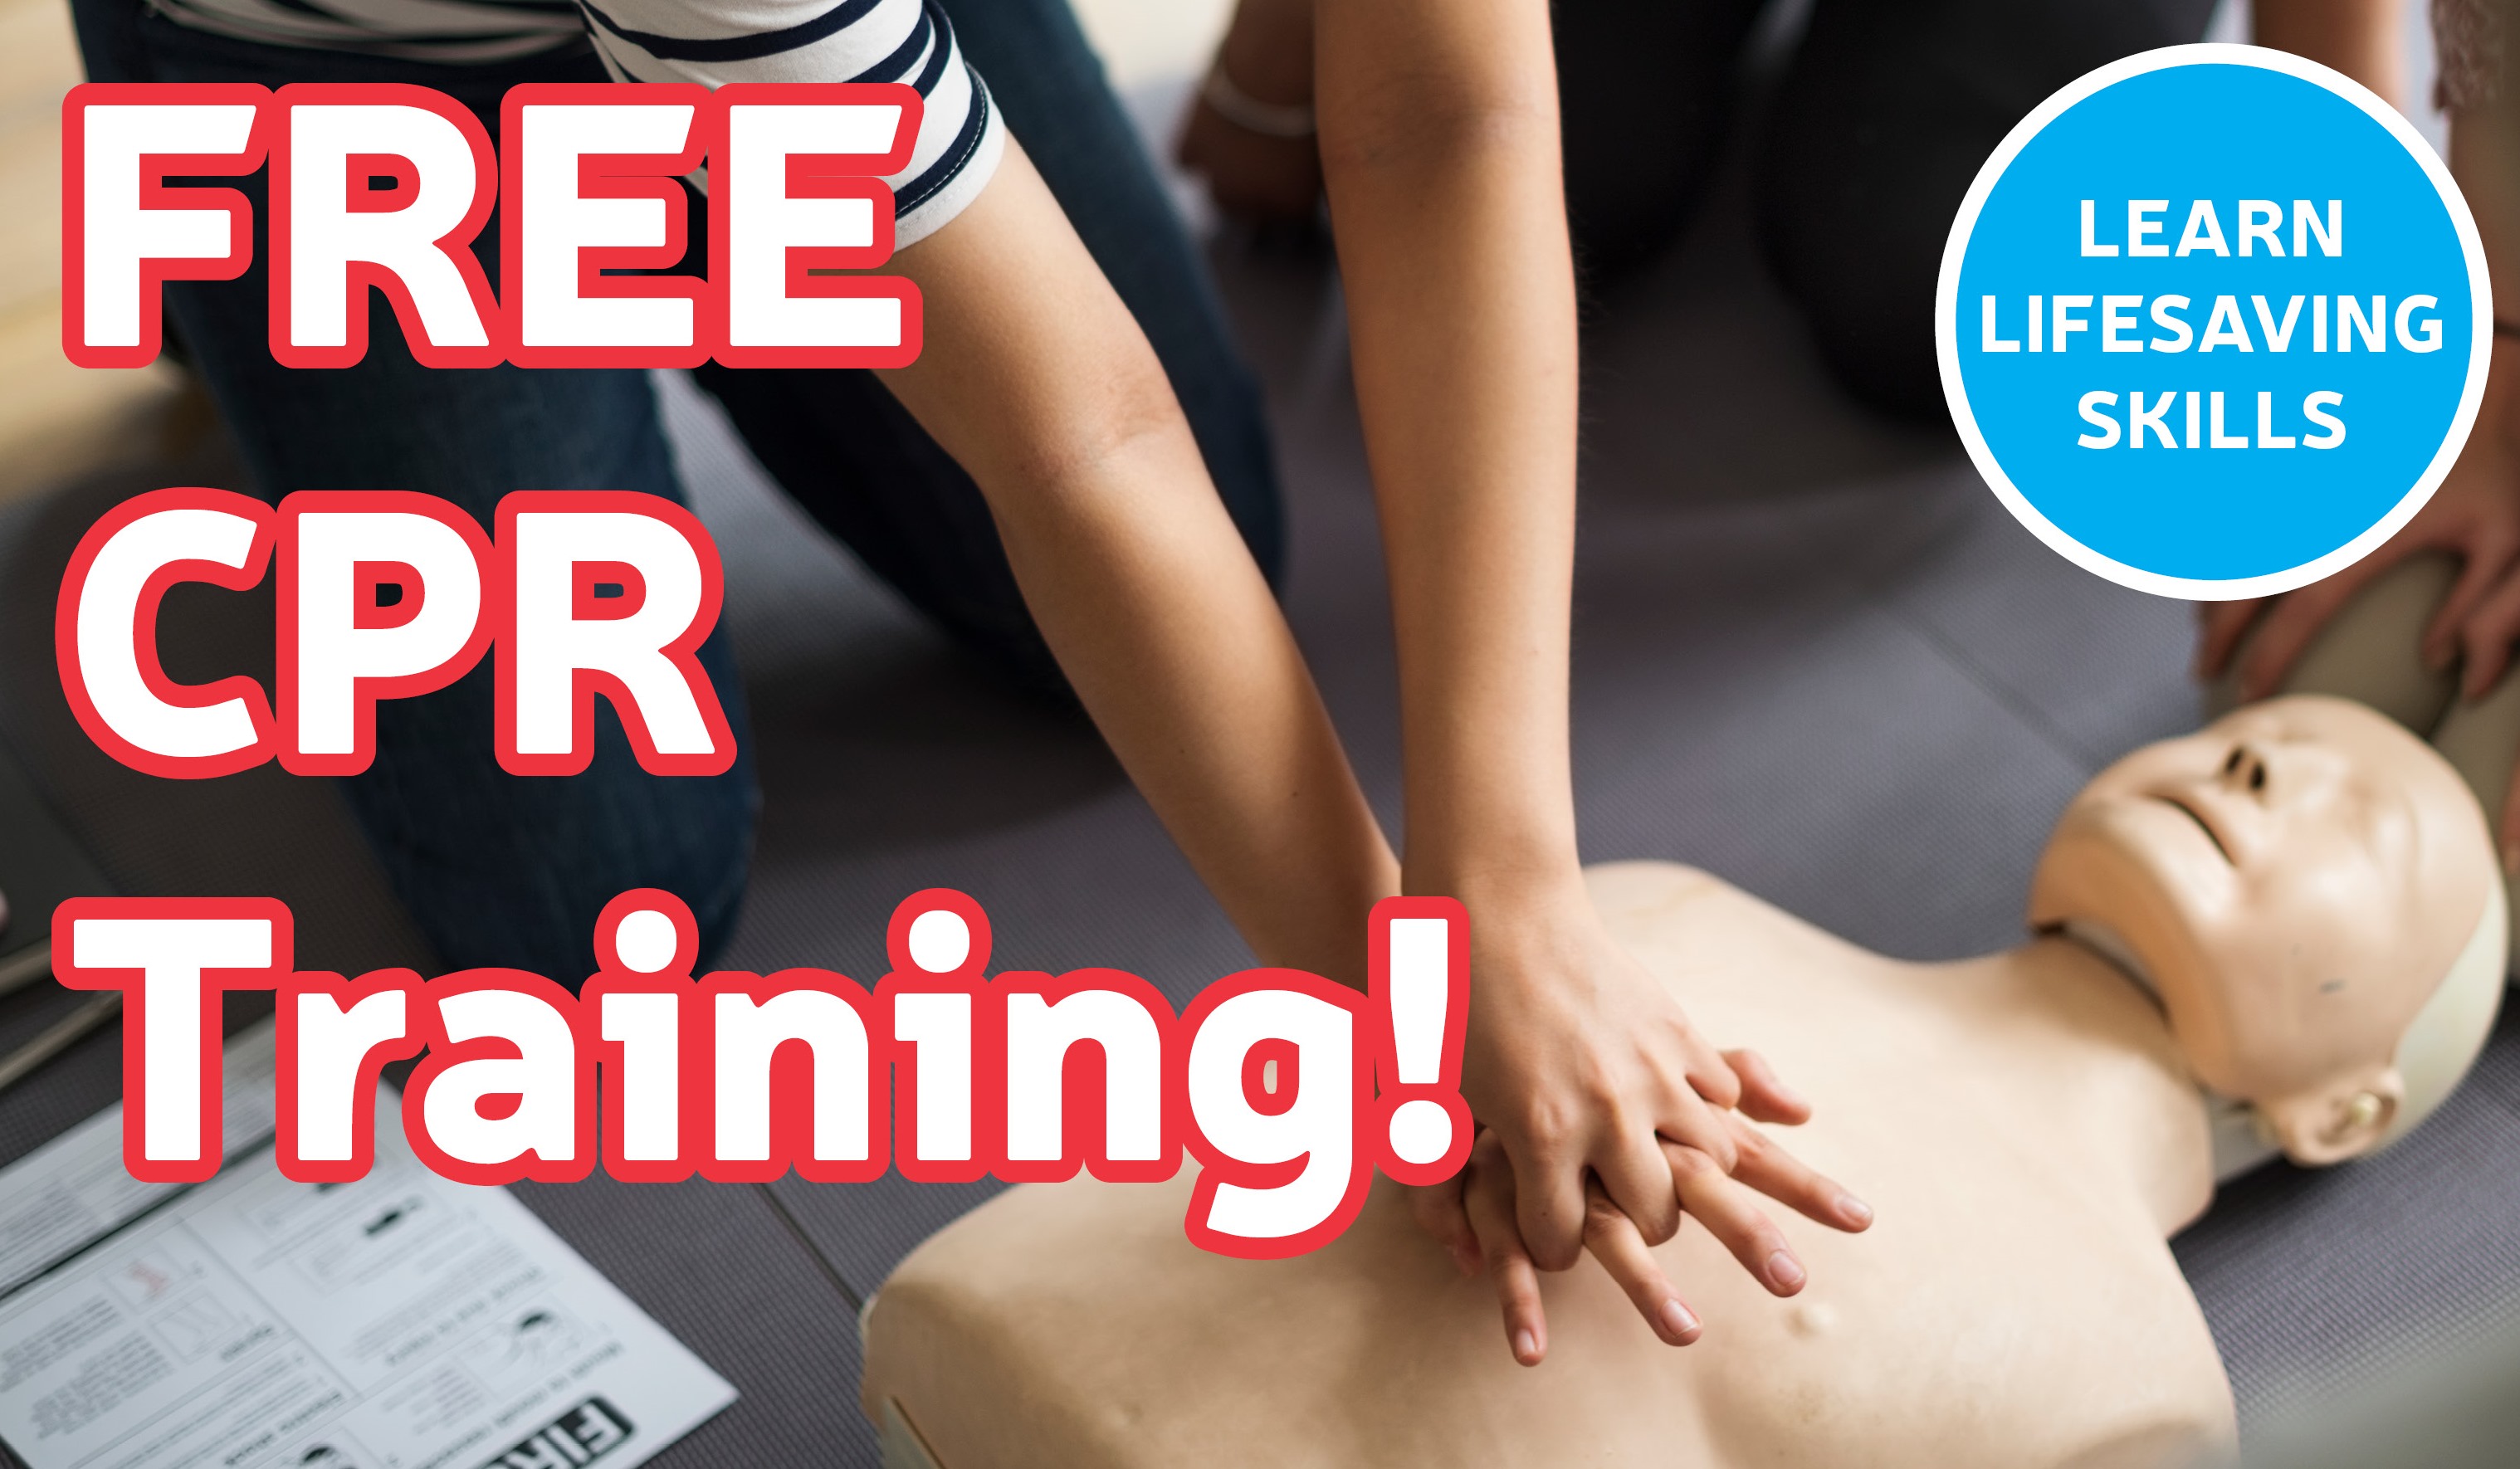 FREE CPR Training with Croí! Croi Heart & Stroke Charity